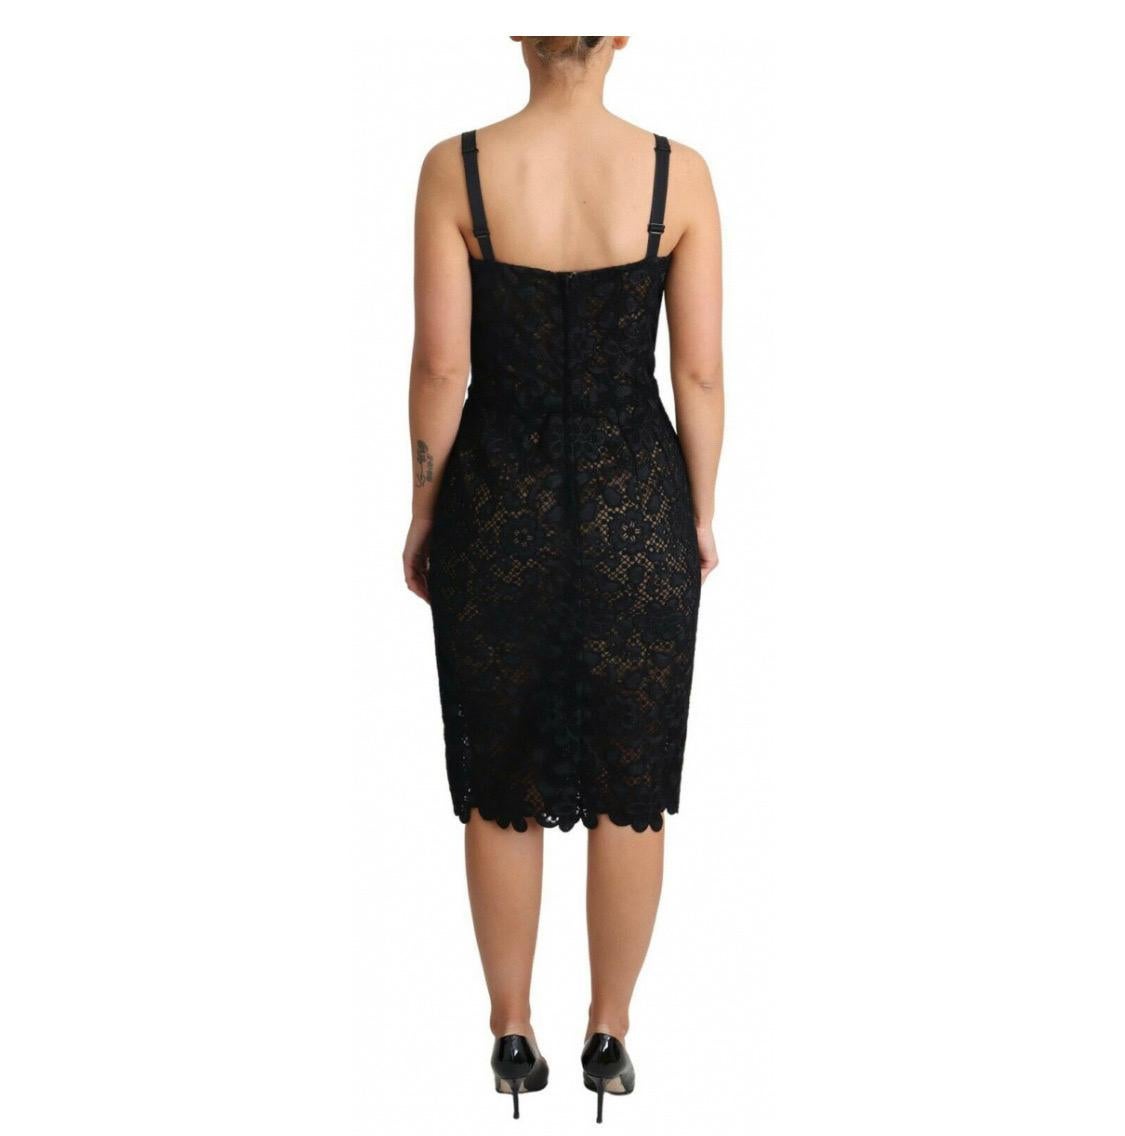 Dolce & Gabbana sleeveless sheath dress is
overlaid in delicate floral lace 7